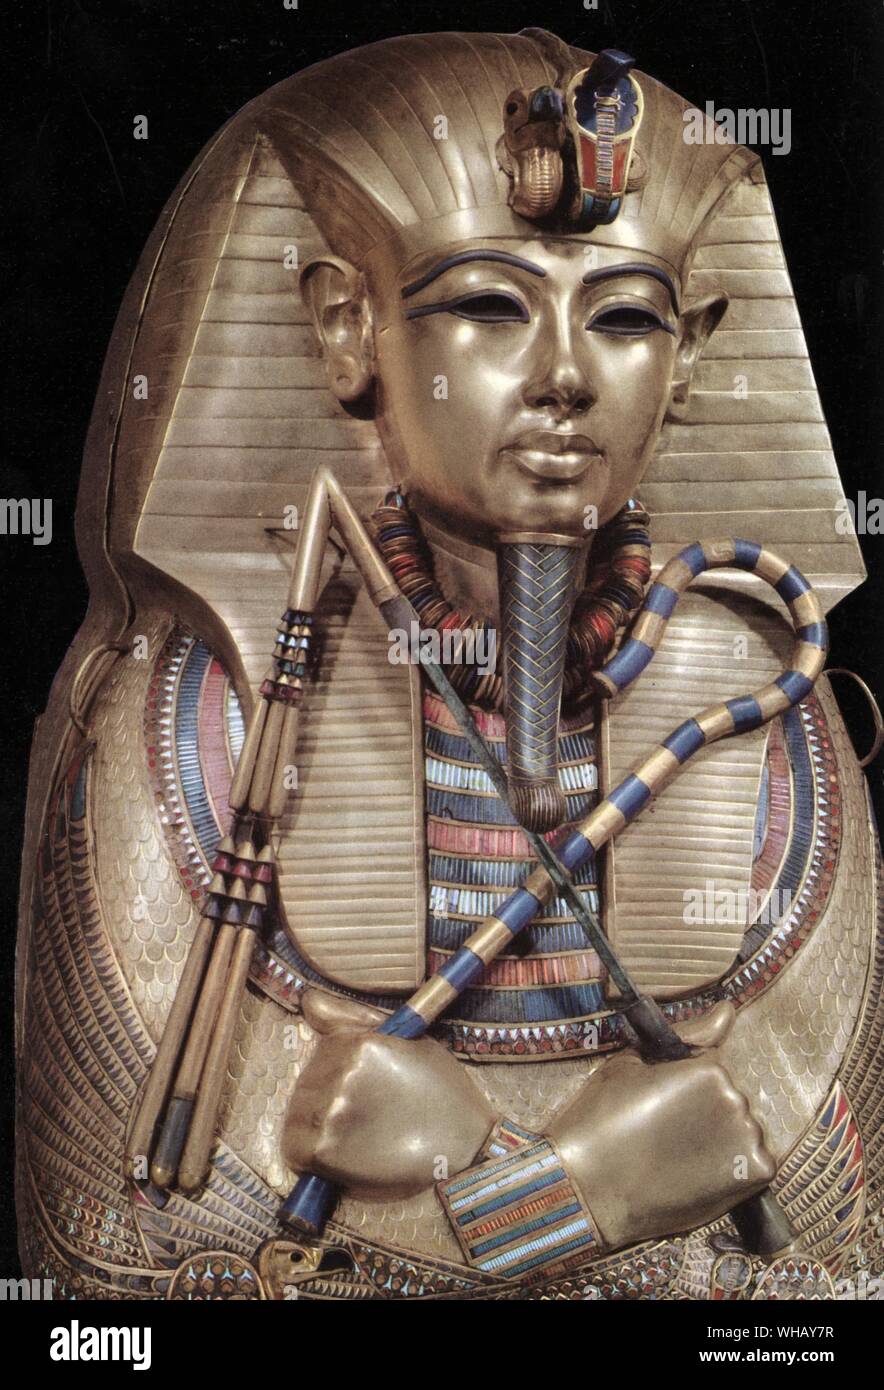 Detail of the second mummiform coffin. Gold plated wood inlaid with glass-paste. Tukankhamen, by Christiane Desroches Noblecourt, page 268.. The Egyptologist Howard Carter (employed by Lord Carnarvon) discovered Tutankhamun's tomb (since designated KV62) in The Valley of The Kings on November 4, 1922 near the entrance to the tomb of Ramses VI. Carter contacted his patron, and on November 26 of that year both men became the first people to enter Tutankhamun's tomb in over 3000 years. After many weeks of careful excavation, on February 16, 1923 Carter opened the inner chamber and first saw the Stock Photo